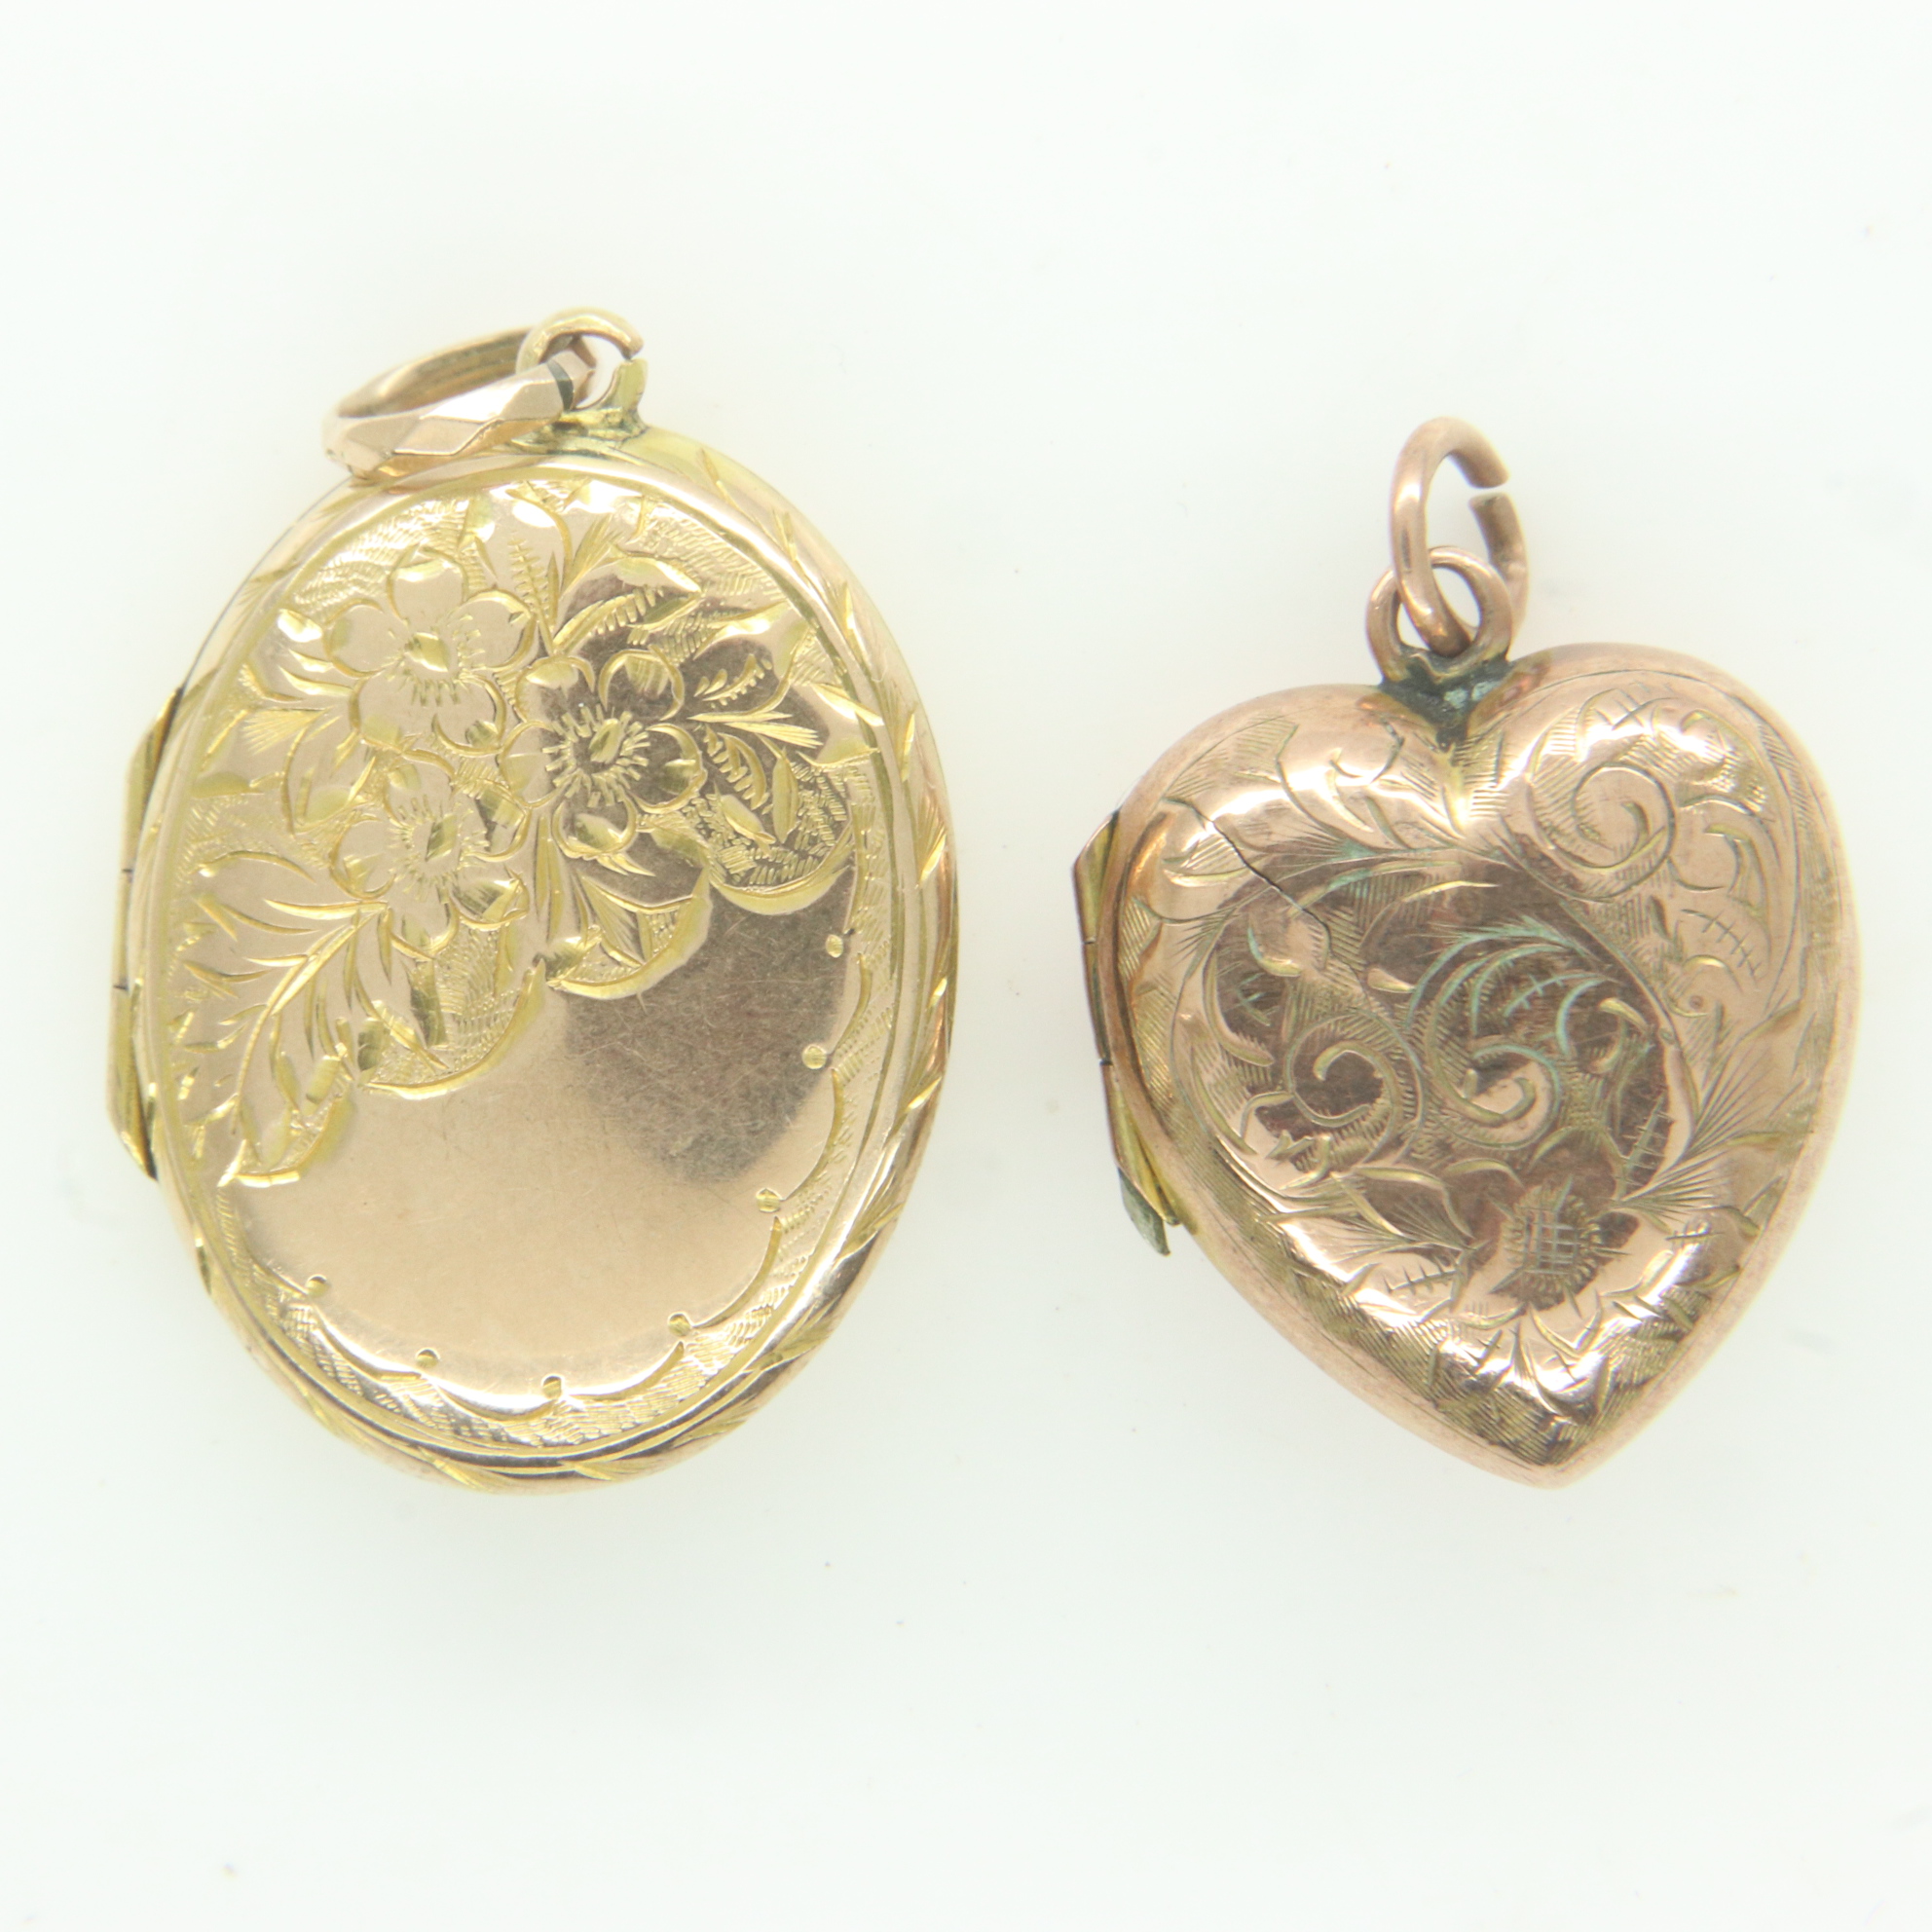 Two 9ct gold locket pendants, combined 4.8g. P&P Group 0 (£6+VAT for the first lot and £1+VAT for